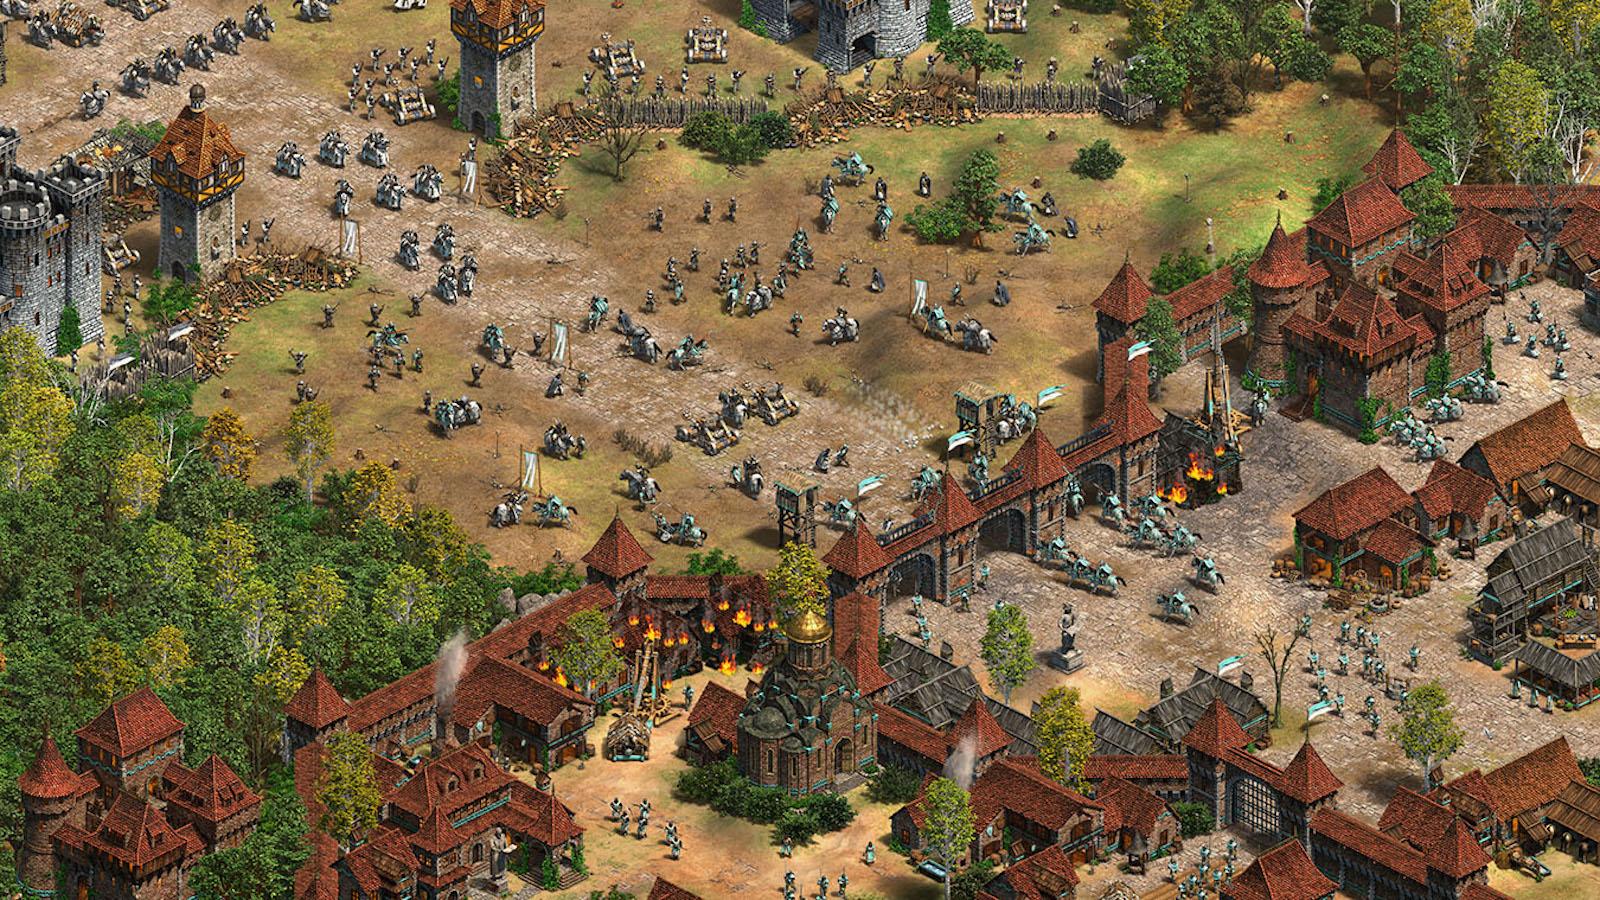 Age of Empires II soldiers attacking town